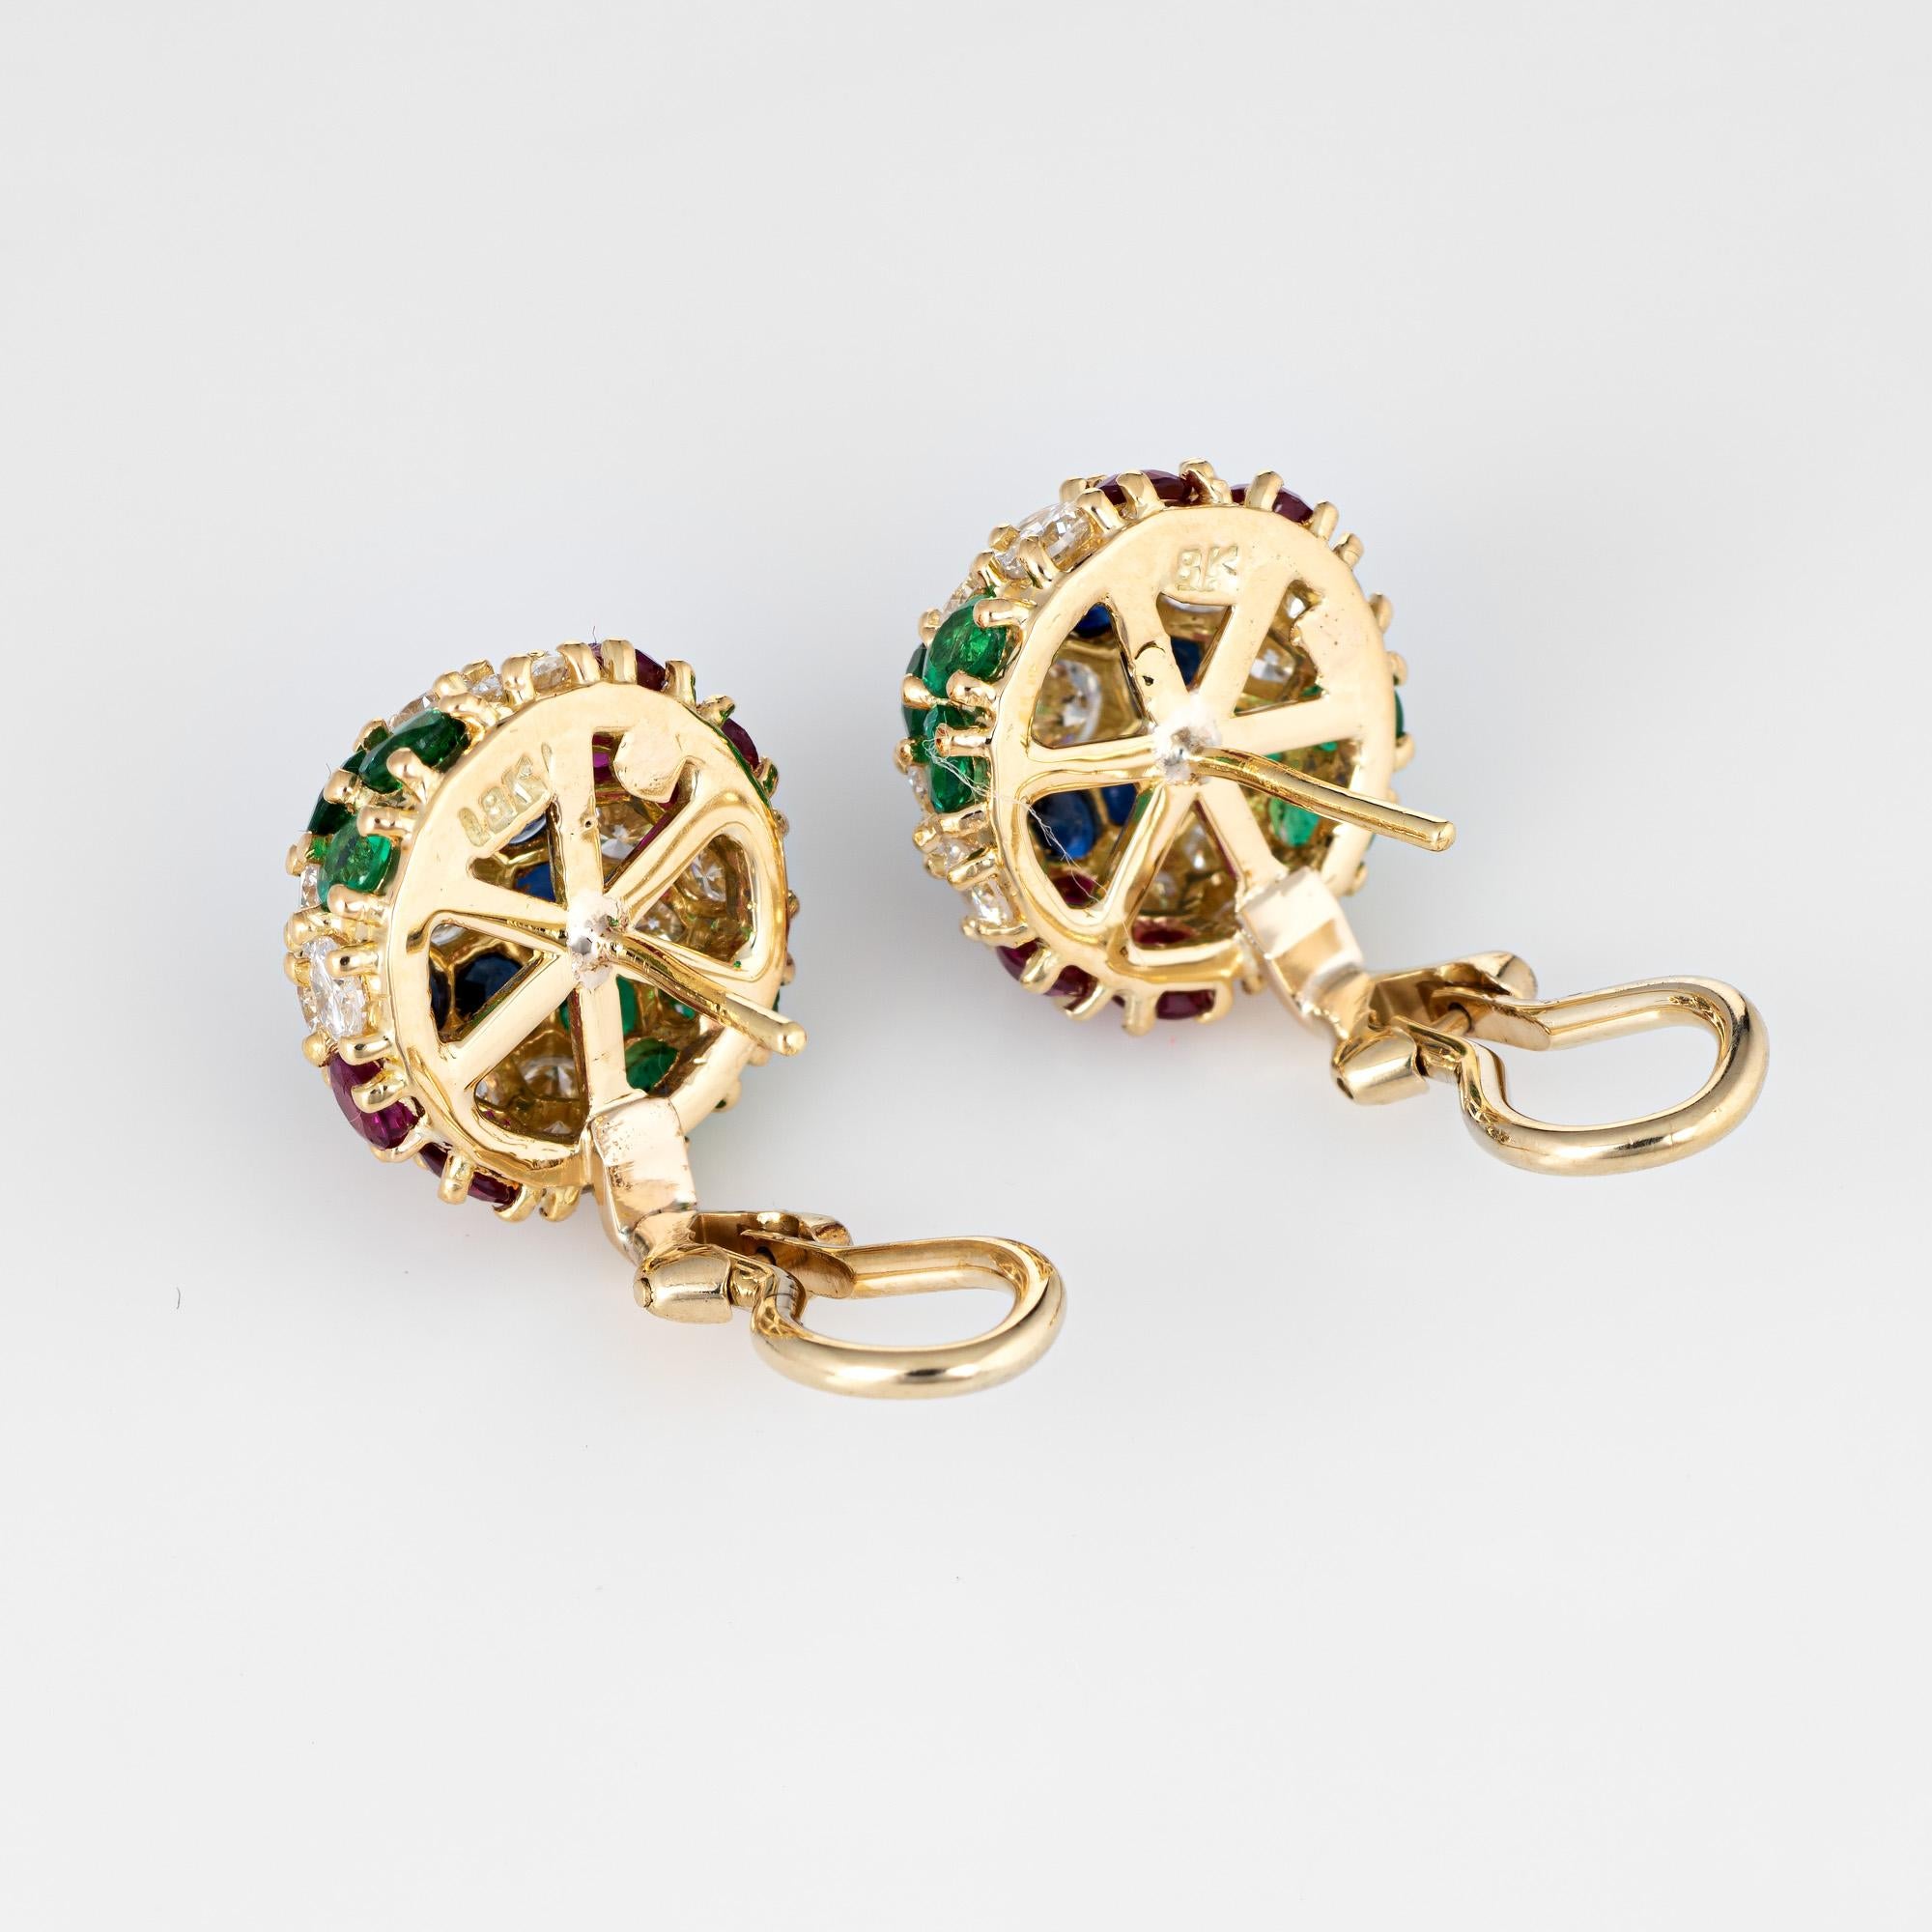 Elegant pair of gemstone cluster earrings crafted in 18k yellow gold. 

Round brilliant cut diamonds total an estimated 2.70 carats (estimated at G-H color and VS1-2 clarity). Emeralds, sapphires and rubies each total an estimated 0.72 carats